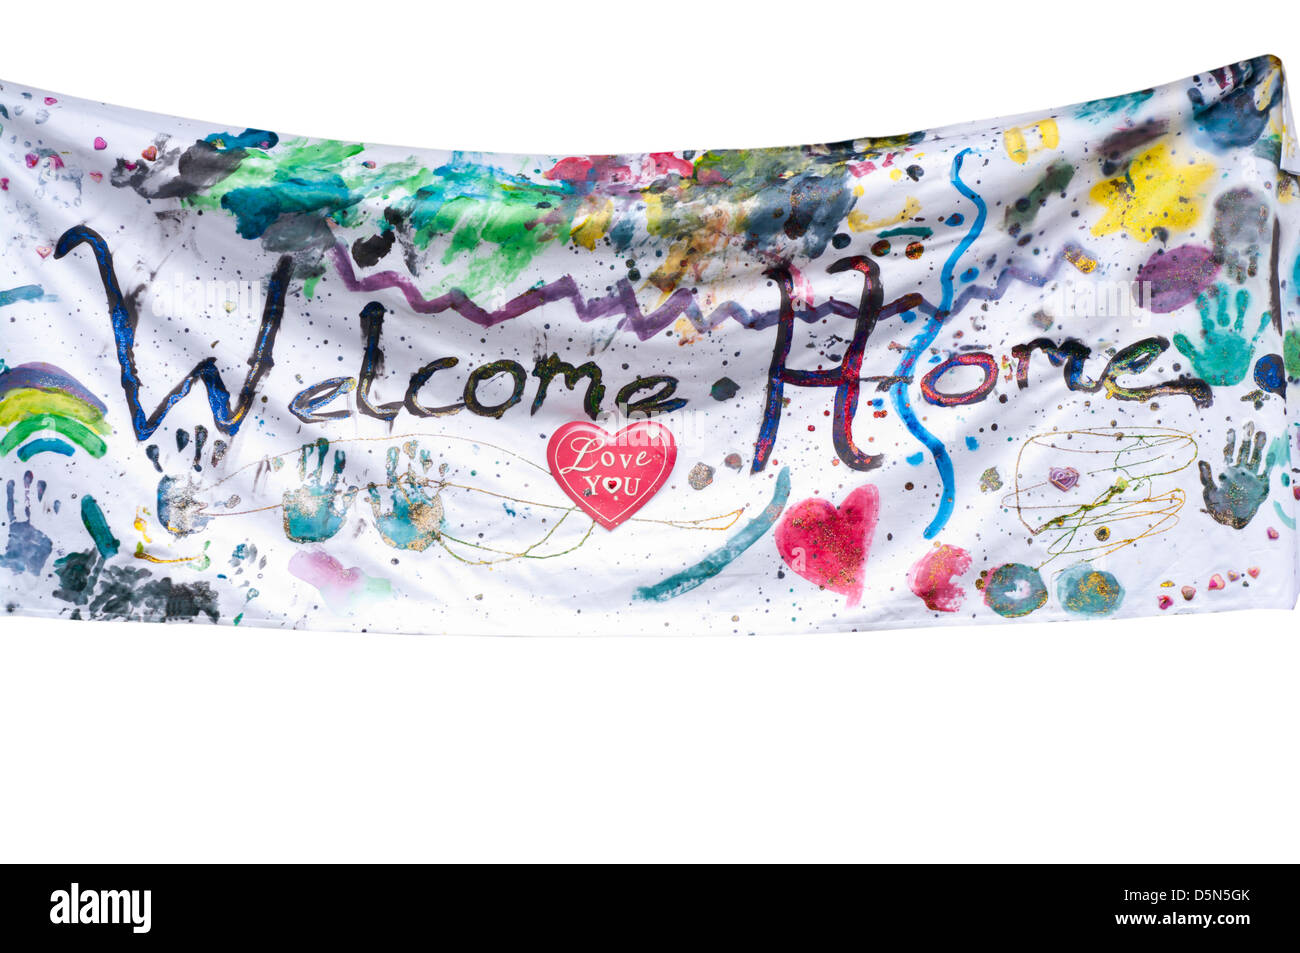 36,534 Welcome Home Sign Images, Stock Photos, 3D objects, & Vectors